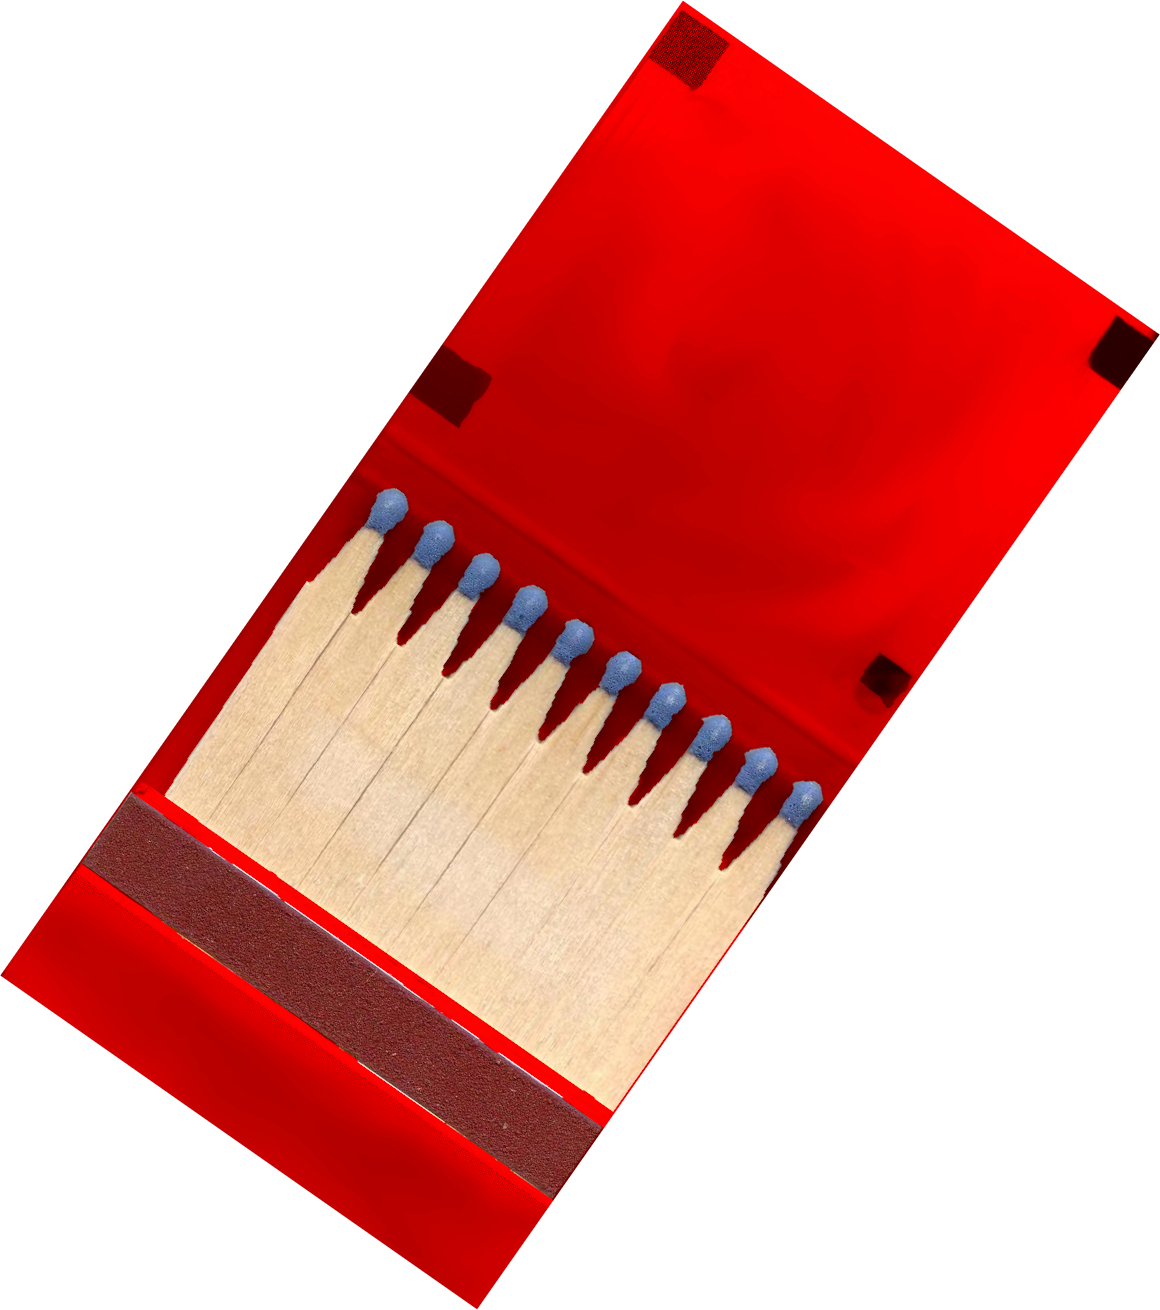 An open red matchbook with ten blue-tipped matches in it.